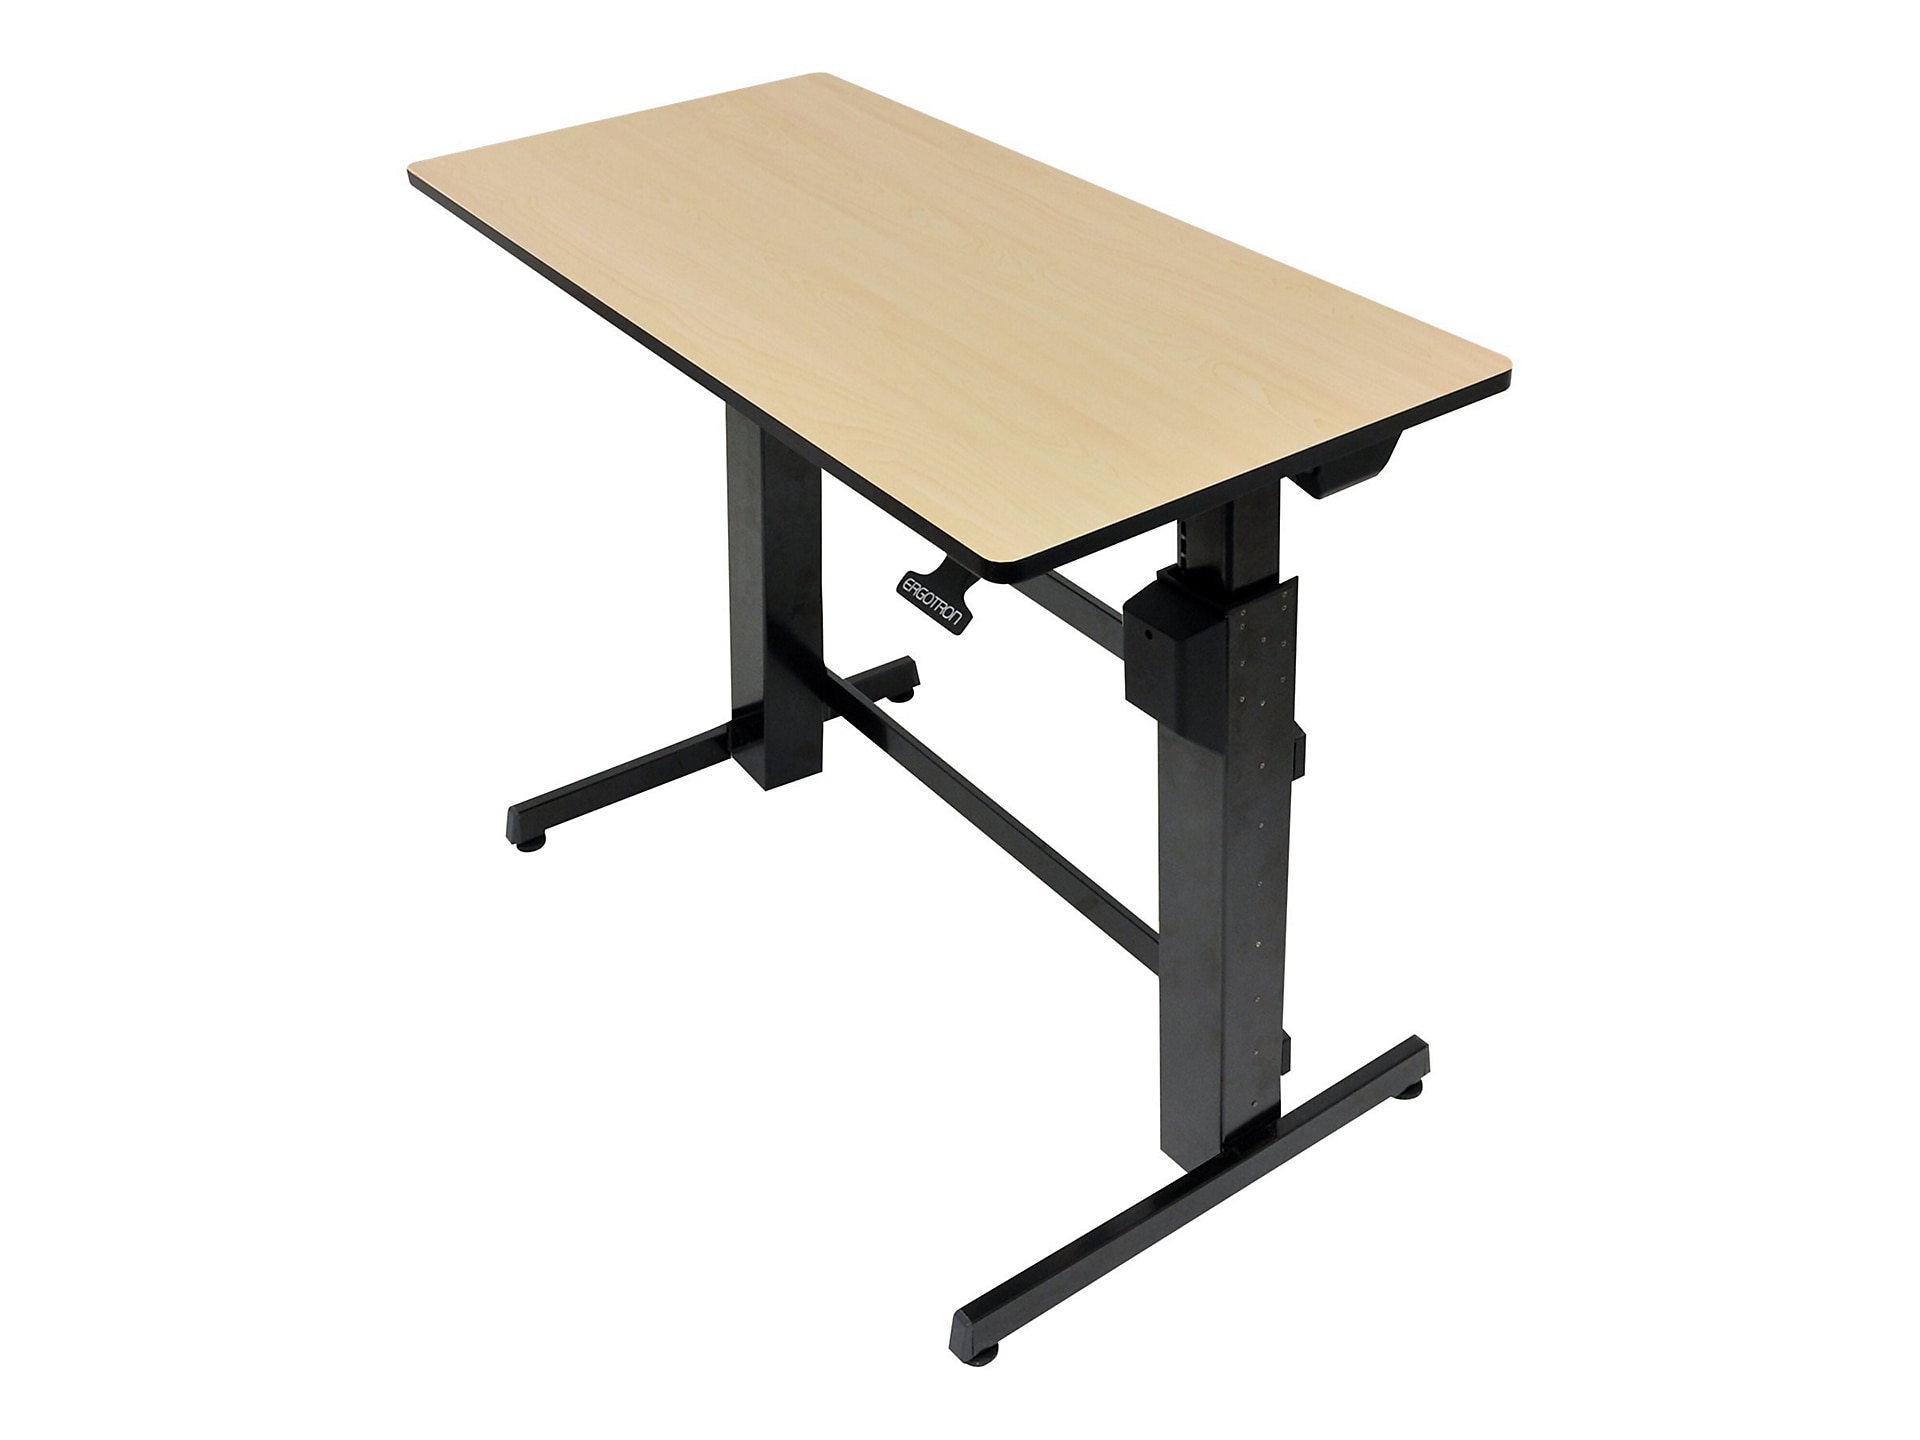 Classroom desks and tables